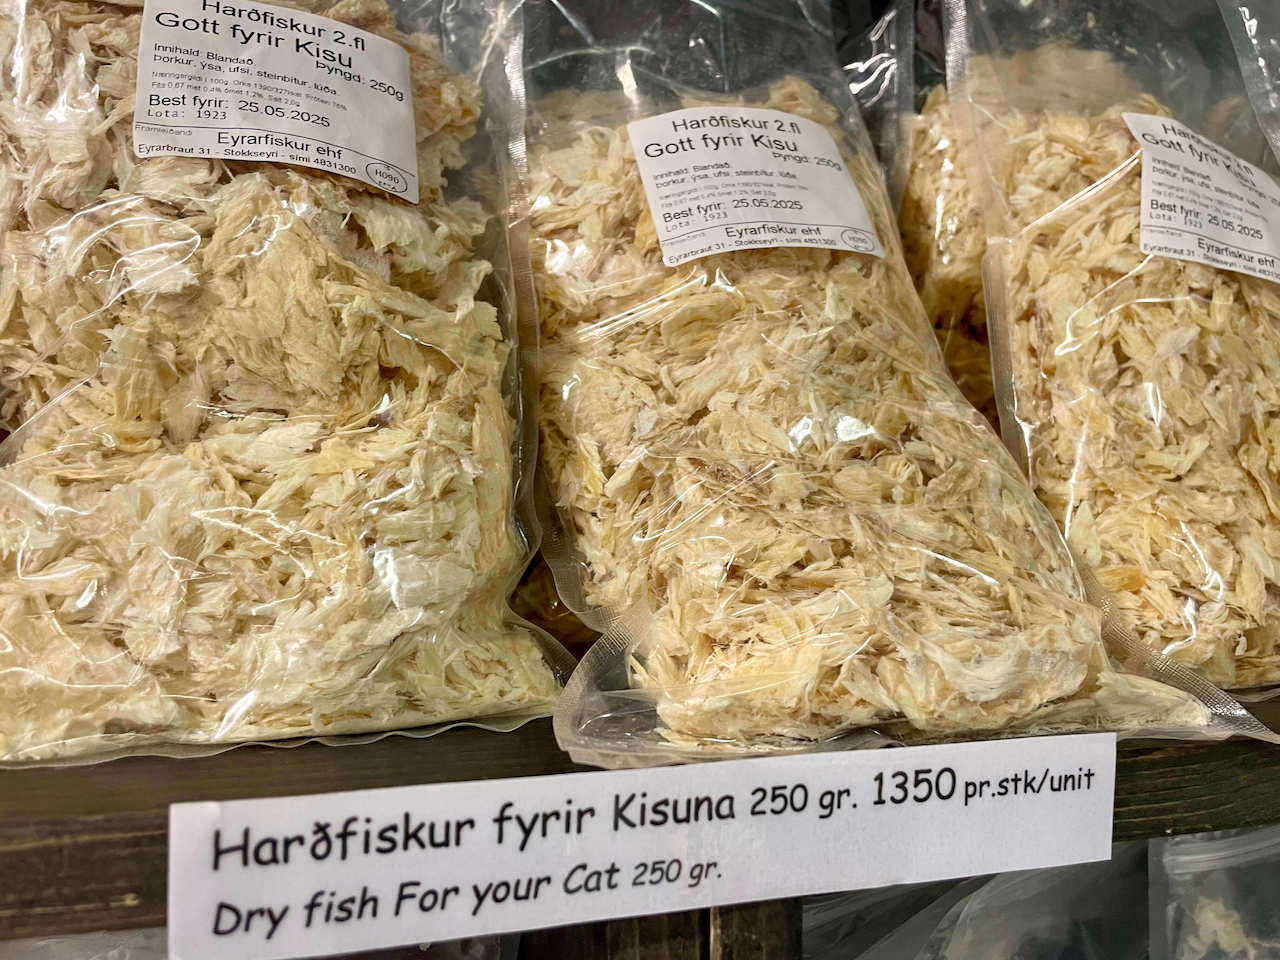 Iceland, Reykjavík – Dry fish for your cat